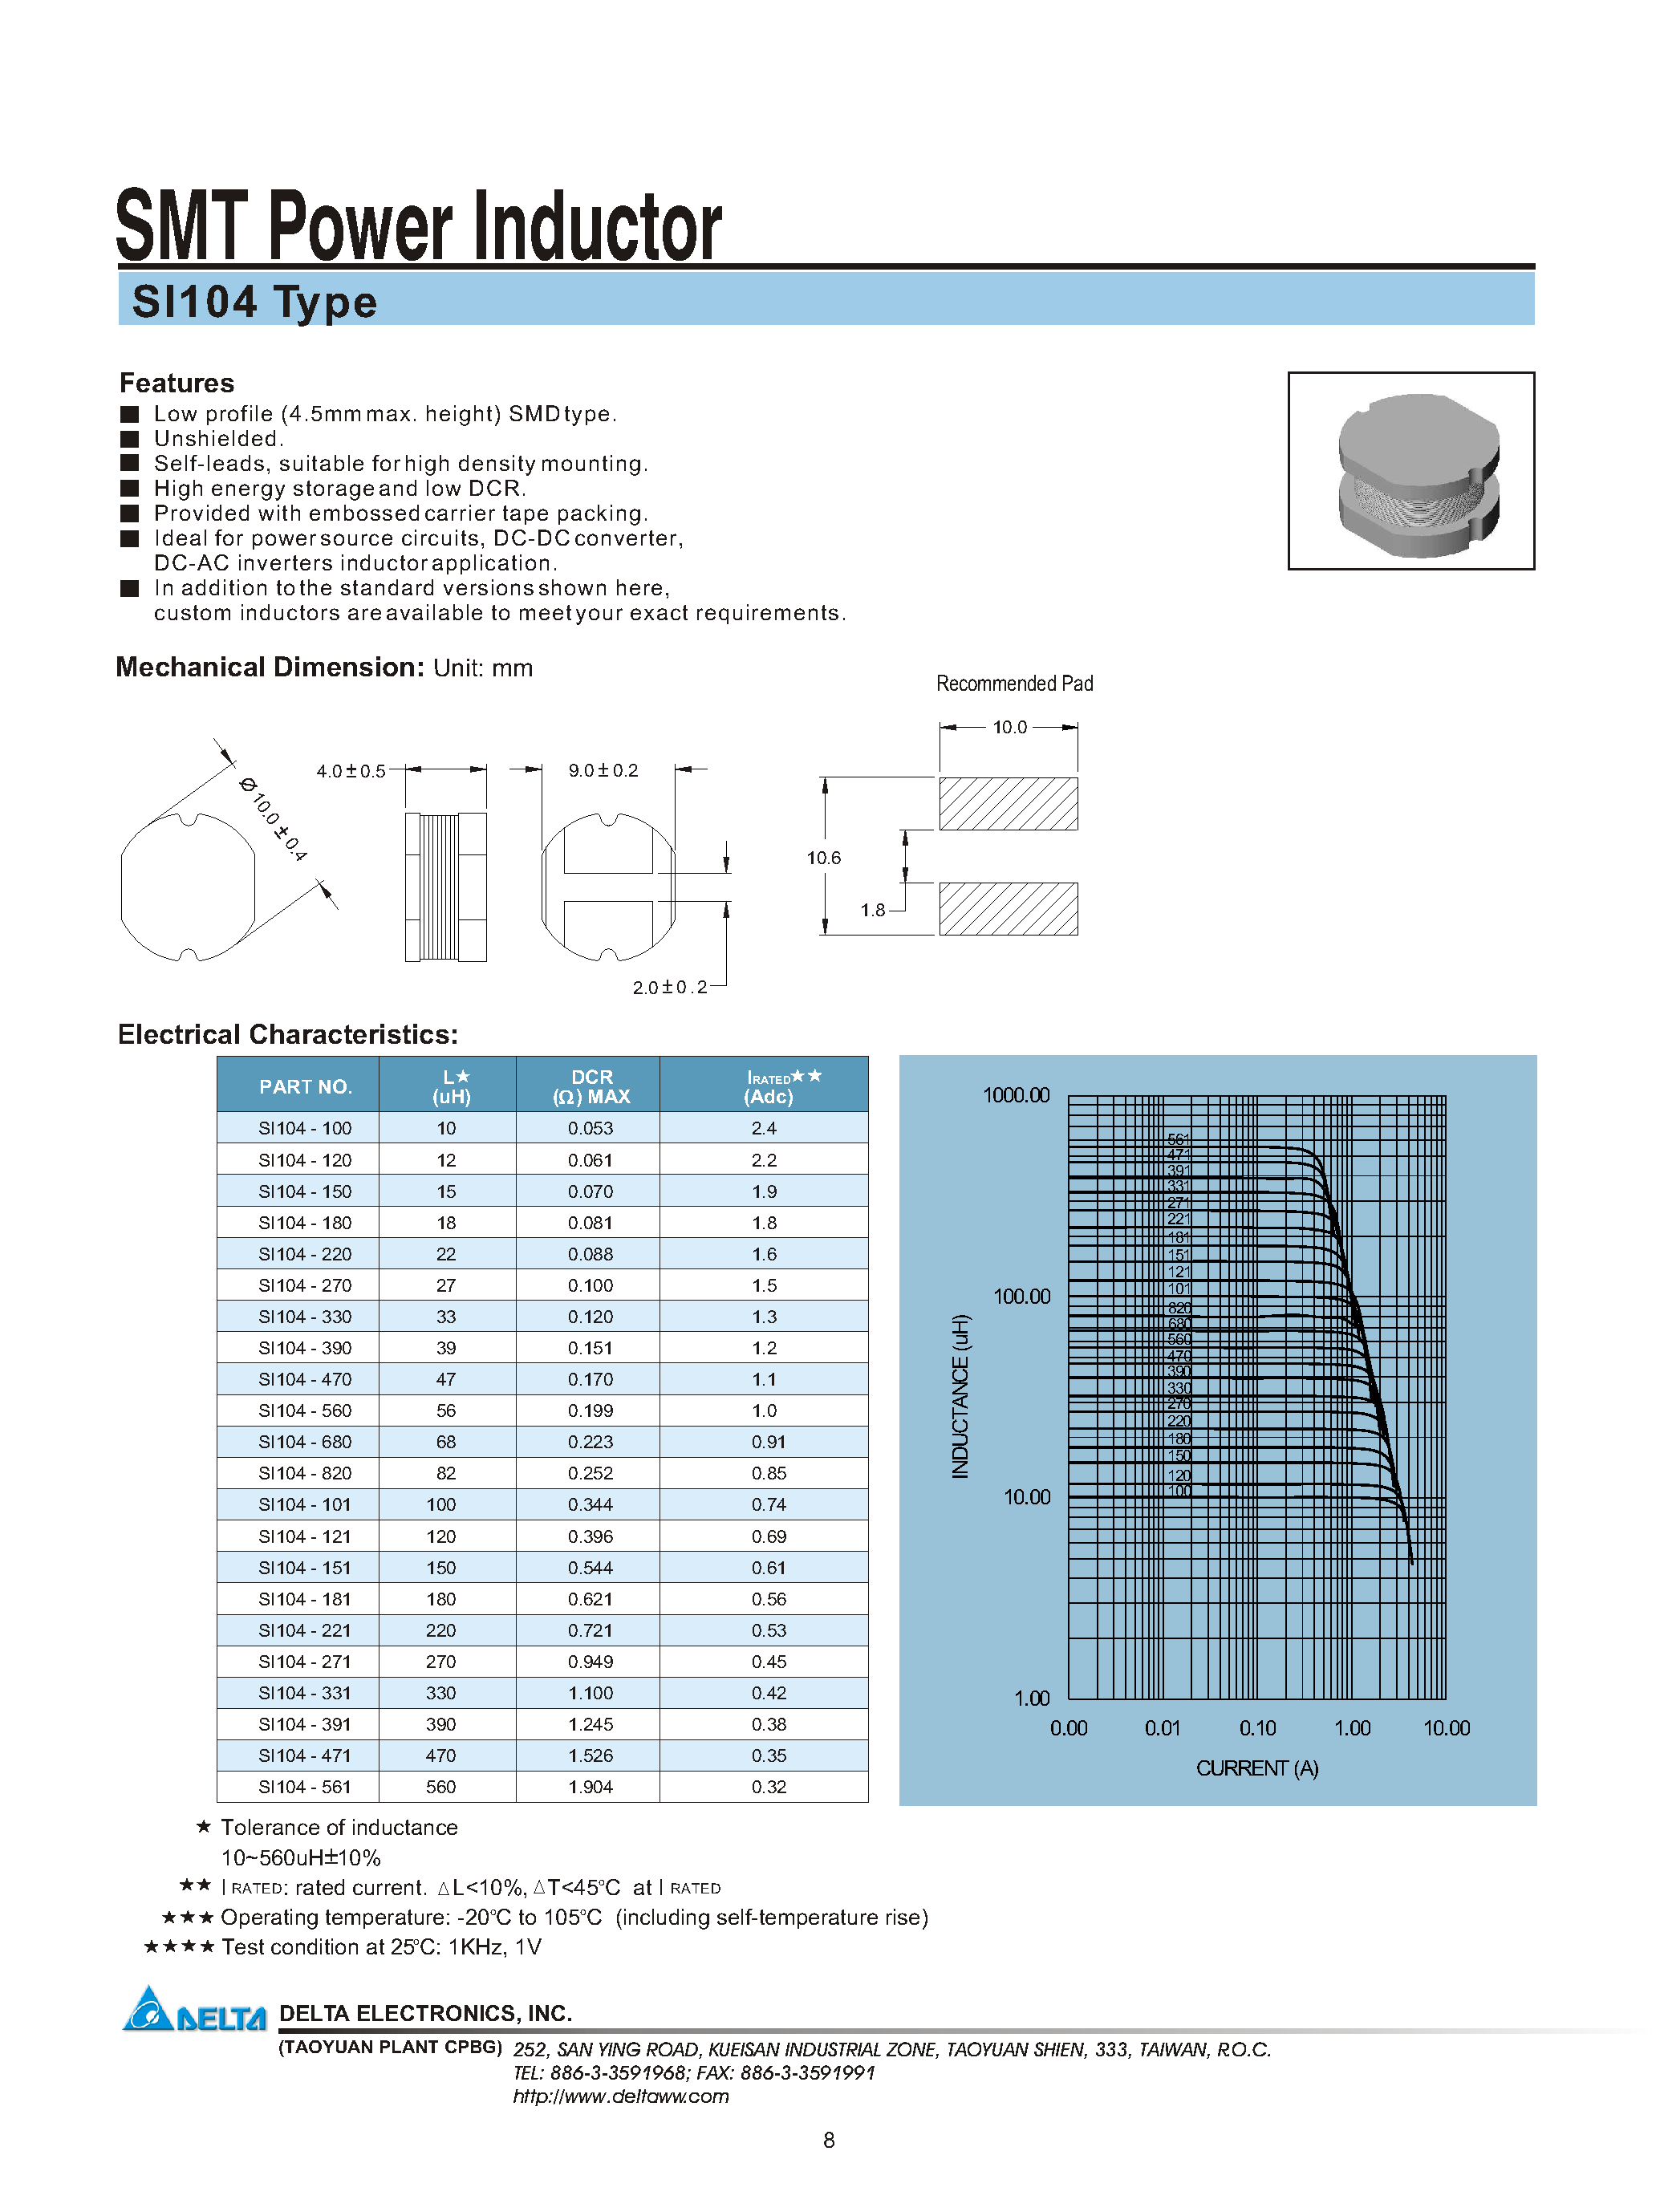 Datasheet SI104-390 - SMT Power Inductor page 1